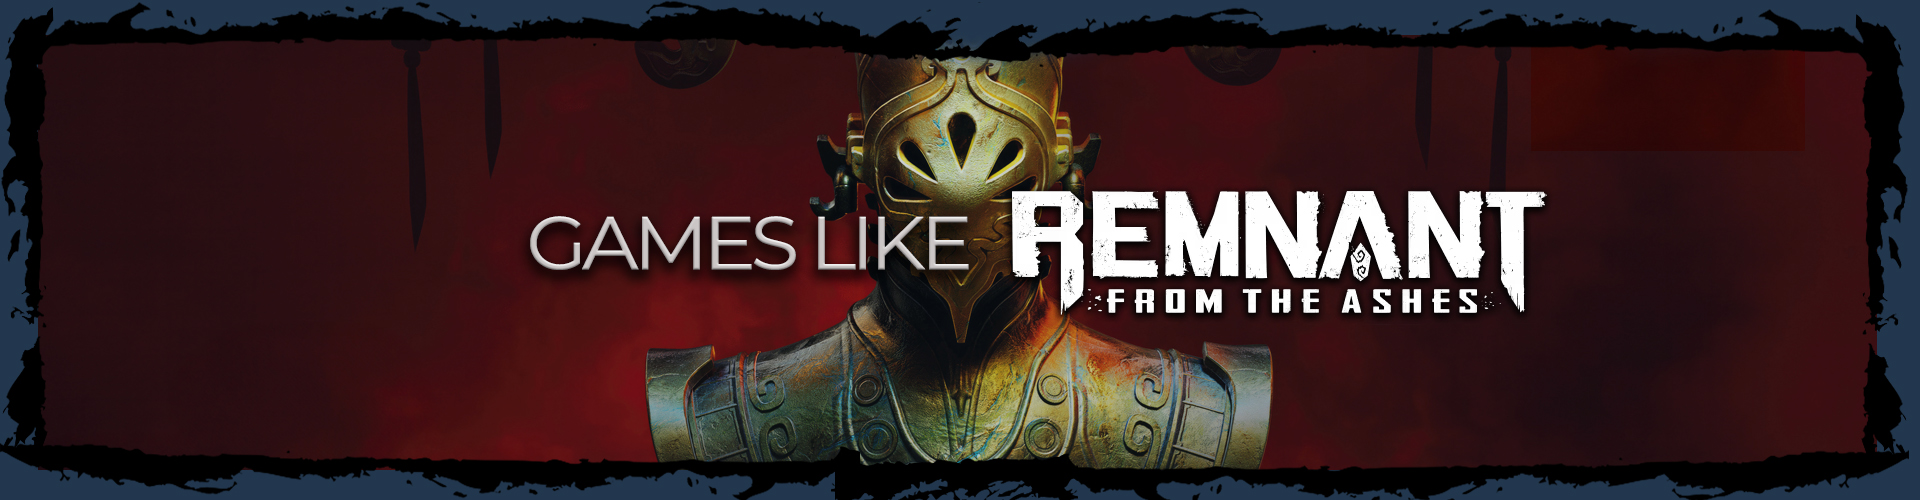 Games like Remnant from the Ashes